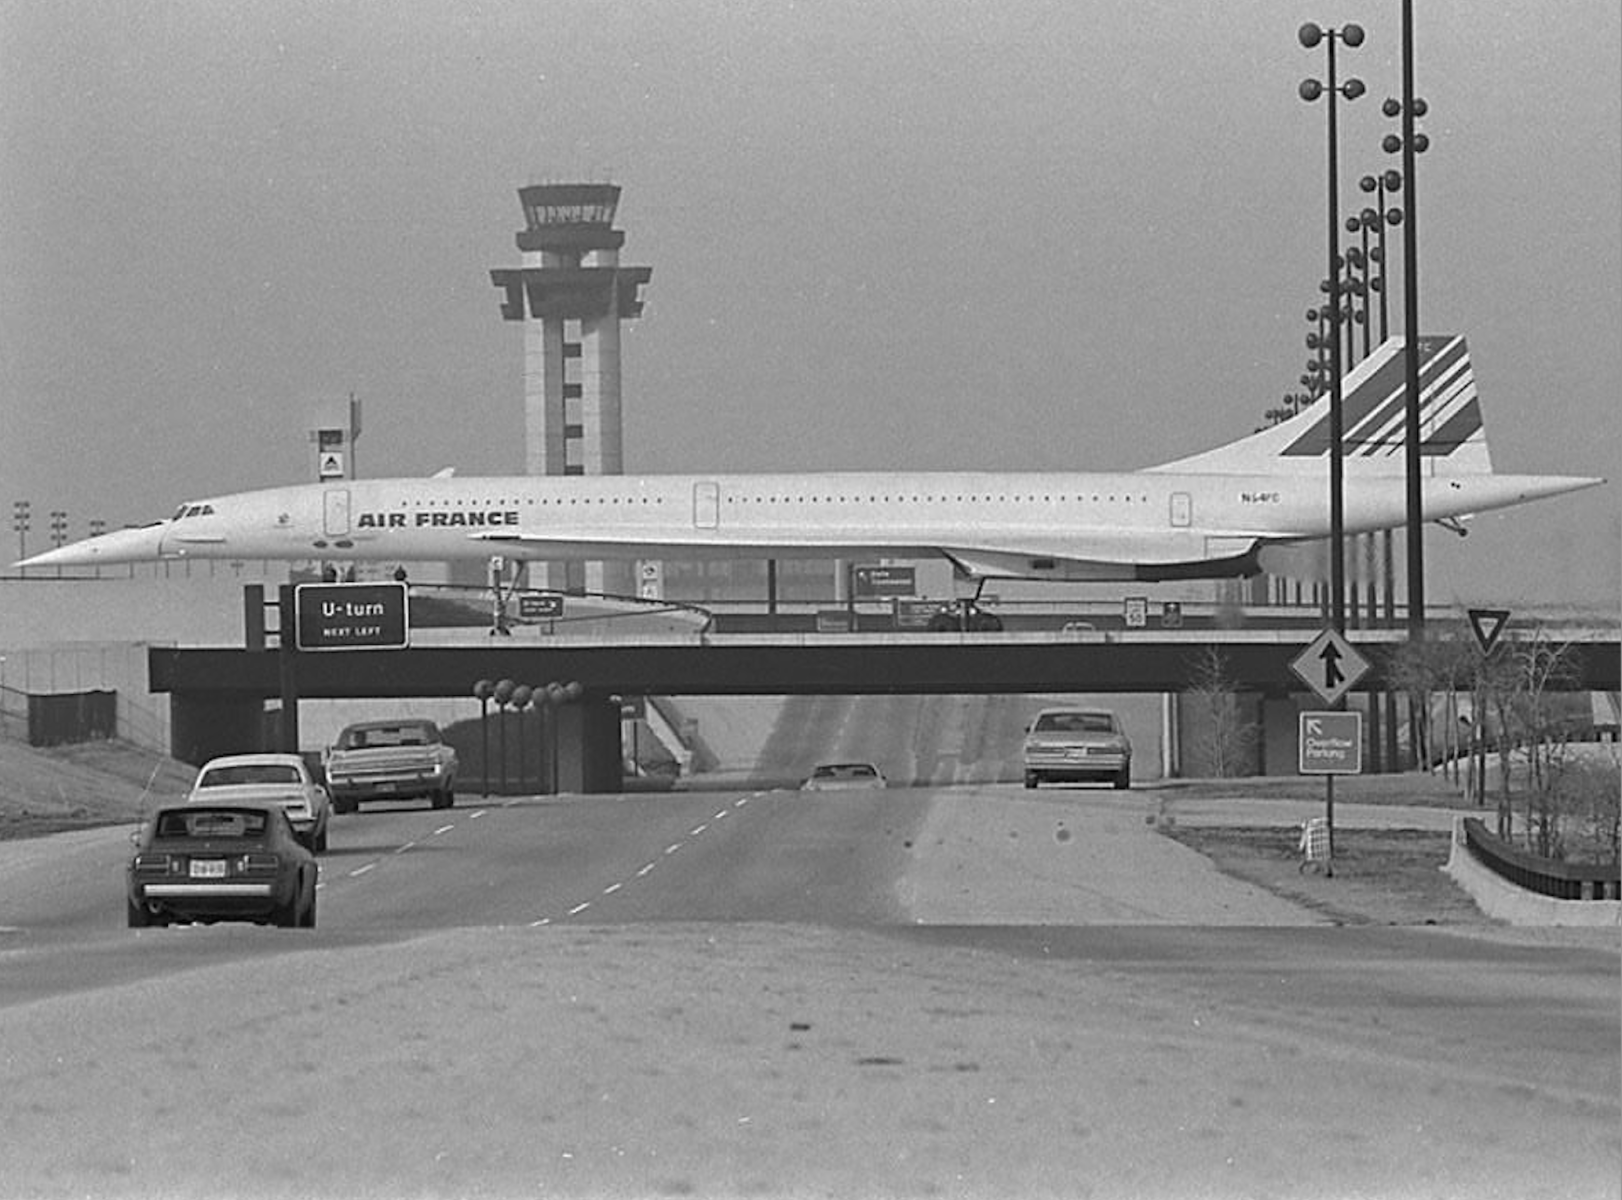 The Concorde of Air France taxiing through Dallas Fort Worth